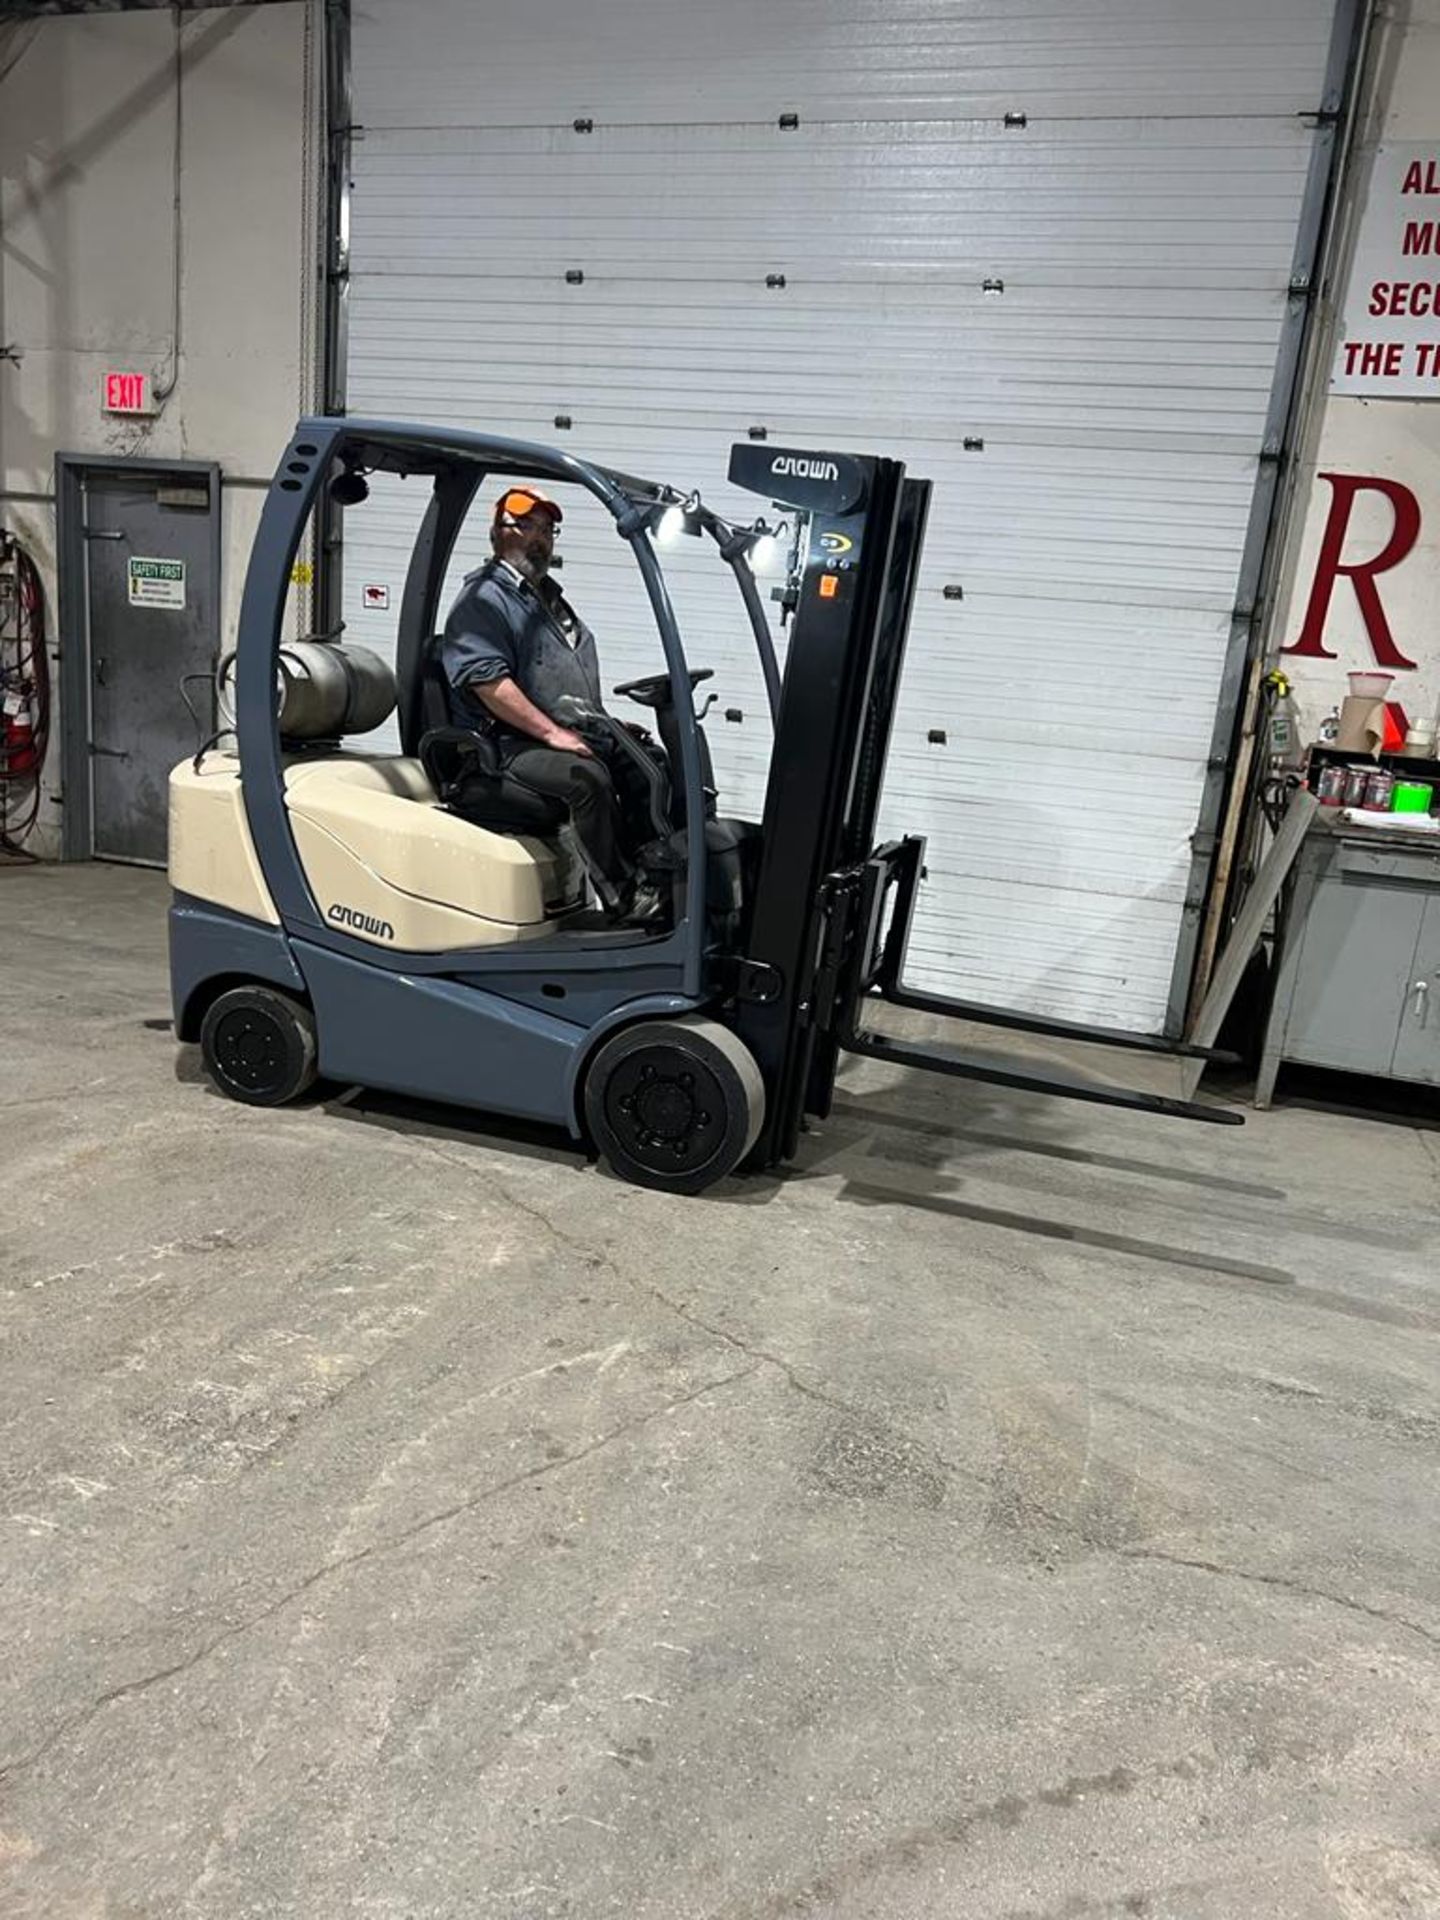 NICE 2016 Crown 5,000lbs Capacity Forklift LPG (propane) with Sideshift & 3-stage Mast (no propane